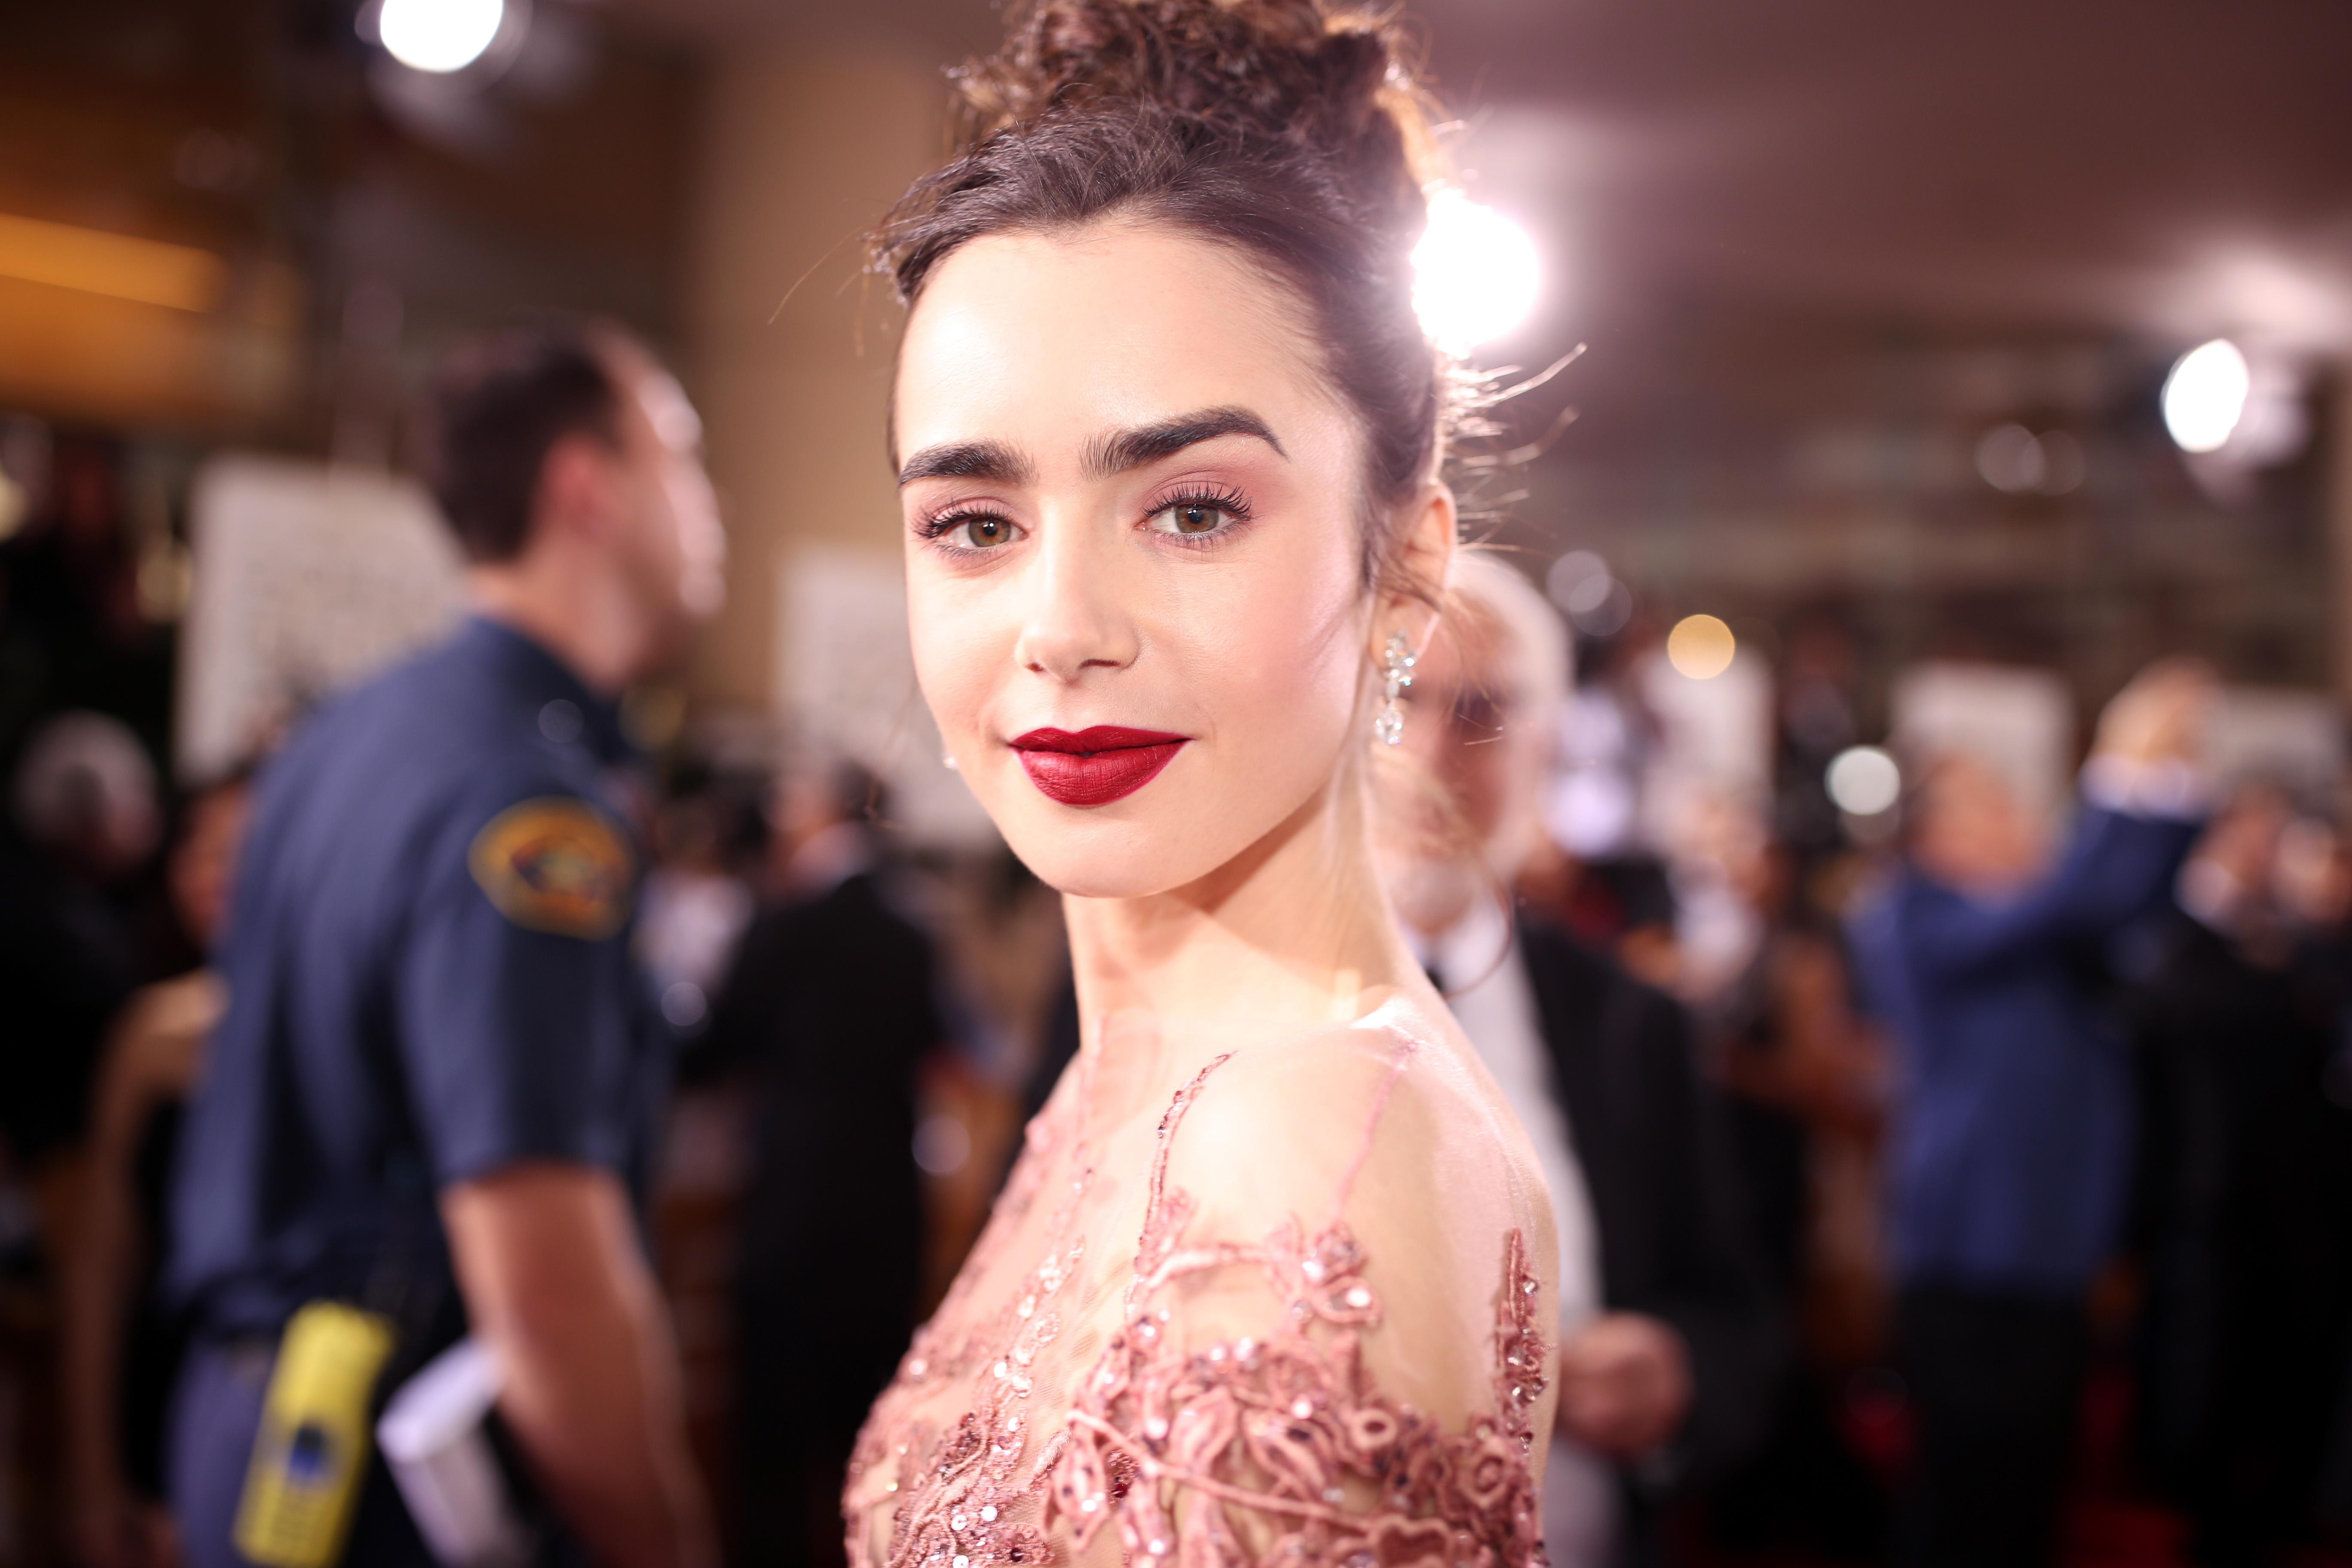 Lily Collins arrives at the 74th Annual Golden Globe Awards held at the Beverly Hilton Hotel on January 8, 2017, in Beverly Hills California. | Source: Getty Images